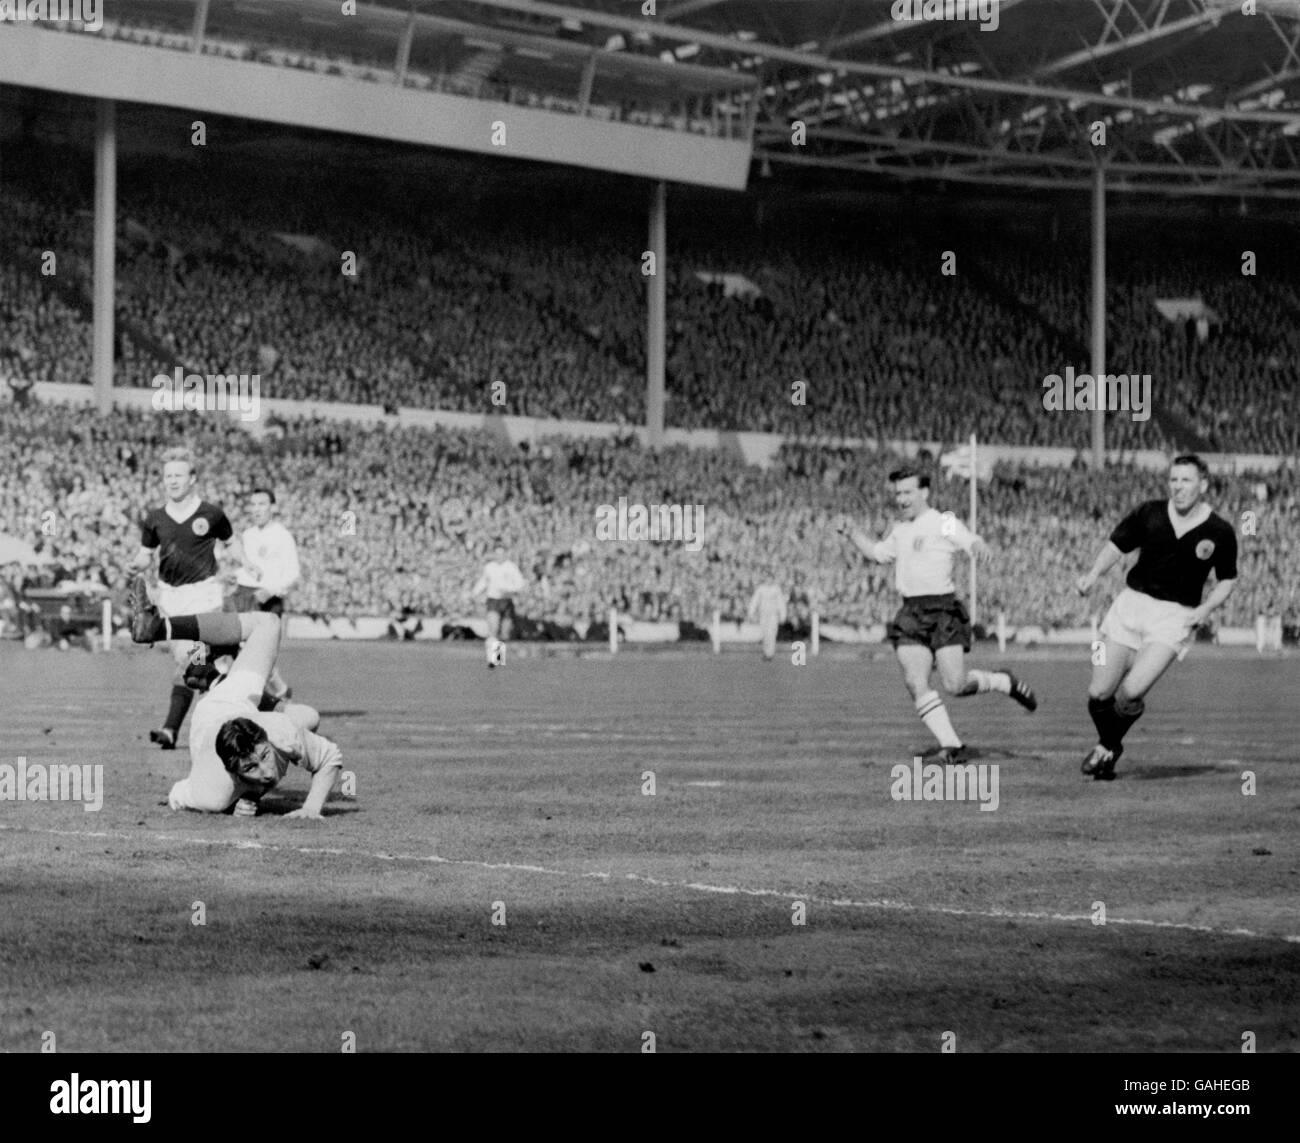 England's Bryan Douglas (second r) fires his team's only goal past Scotland goalkeeper Bill Brown (diving), watched by Scotland's Alex Hamilton (r) and Davie Wilson (l) Stock Photo